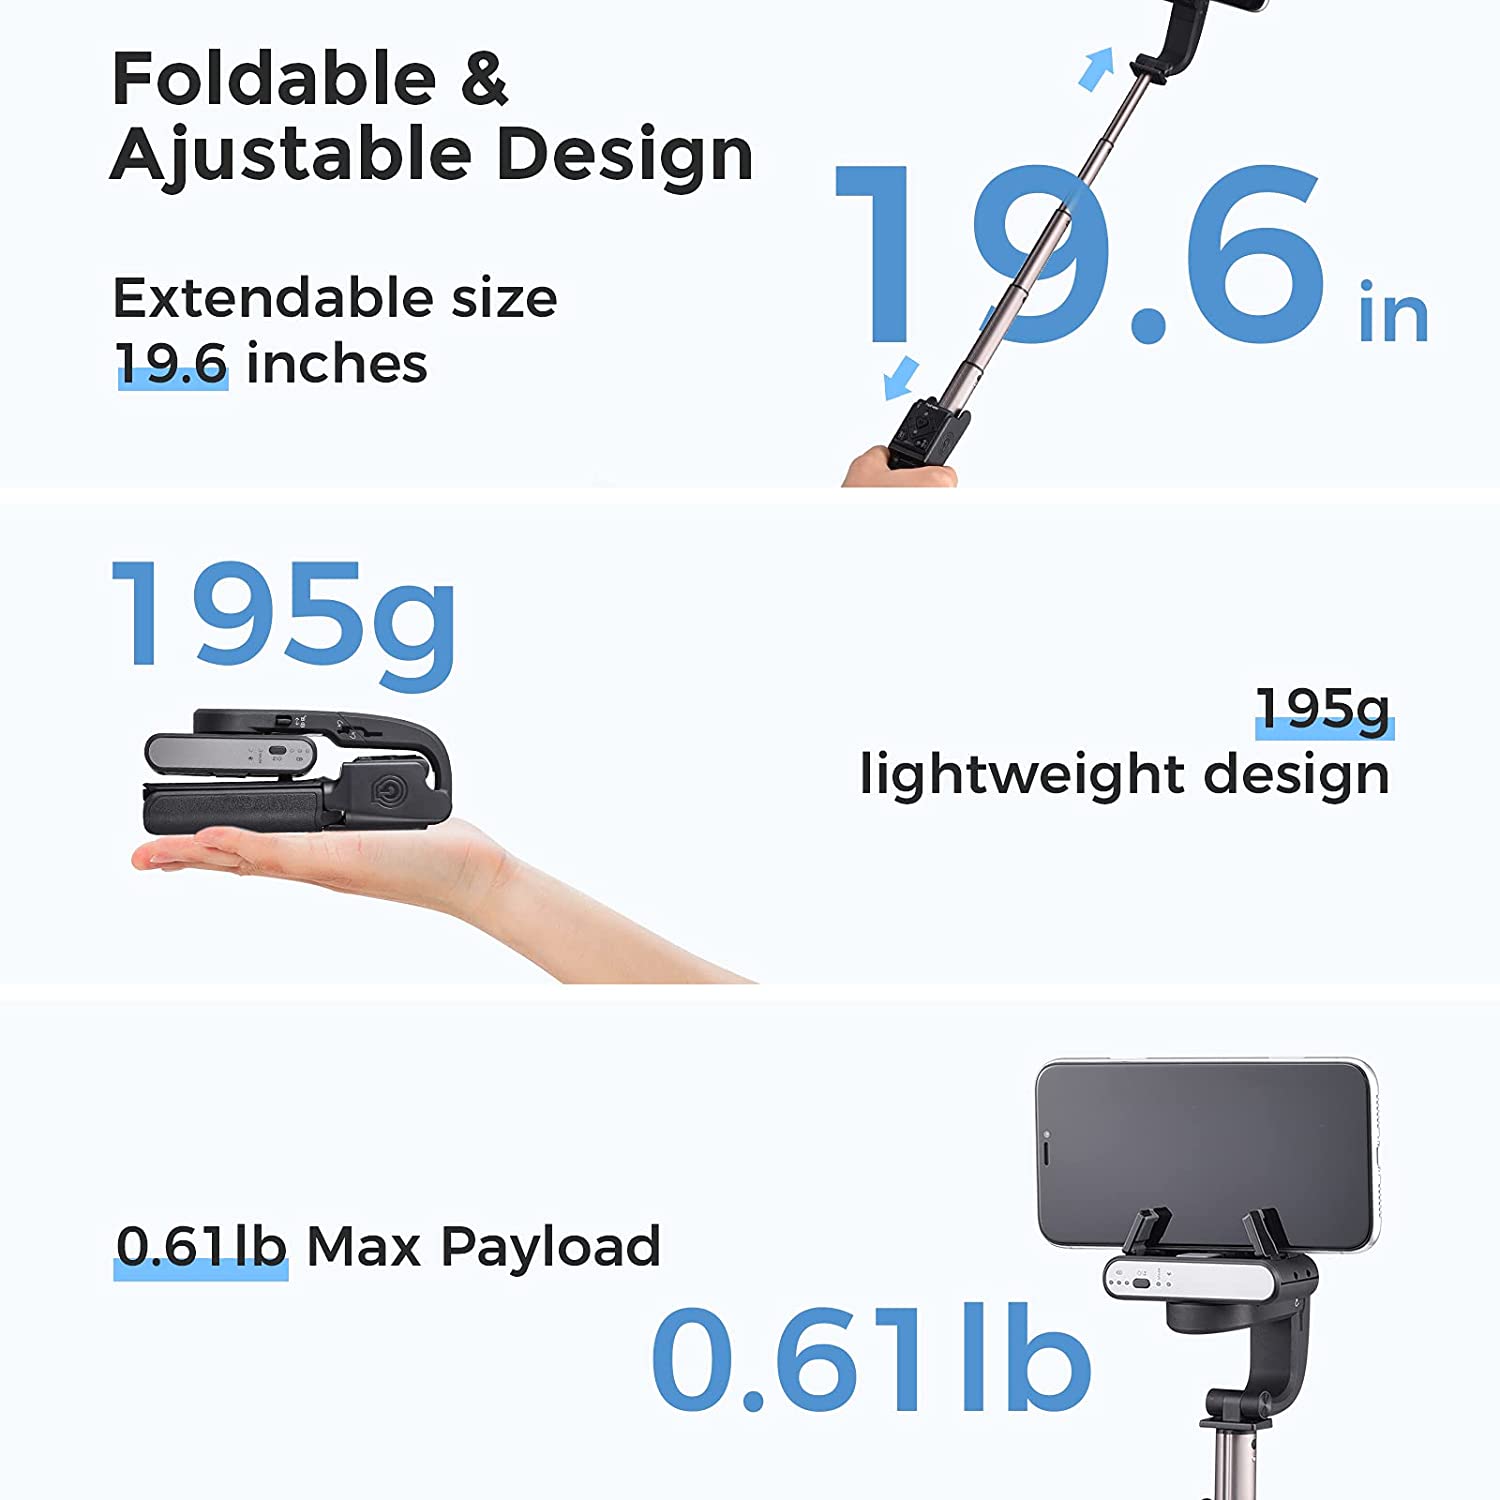 Hohem iSteady Q Handheld Gimbal Stabilizer Phone Selfie Stick Extension Rod Adjustable Tripod with Remote Control for Smartphone